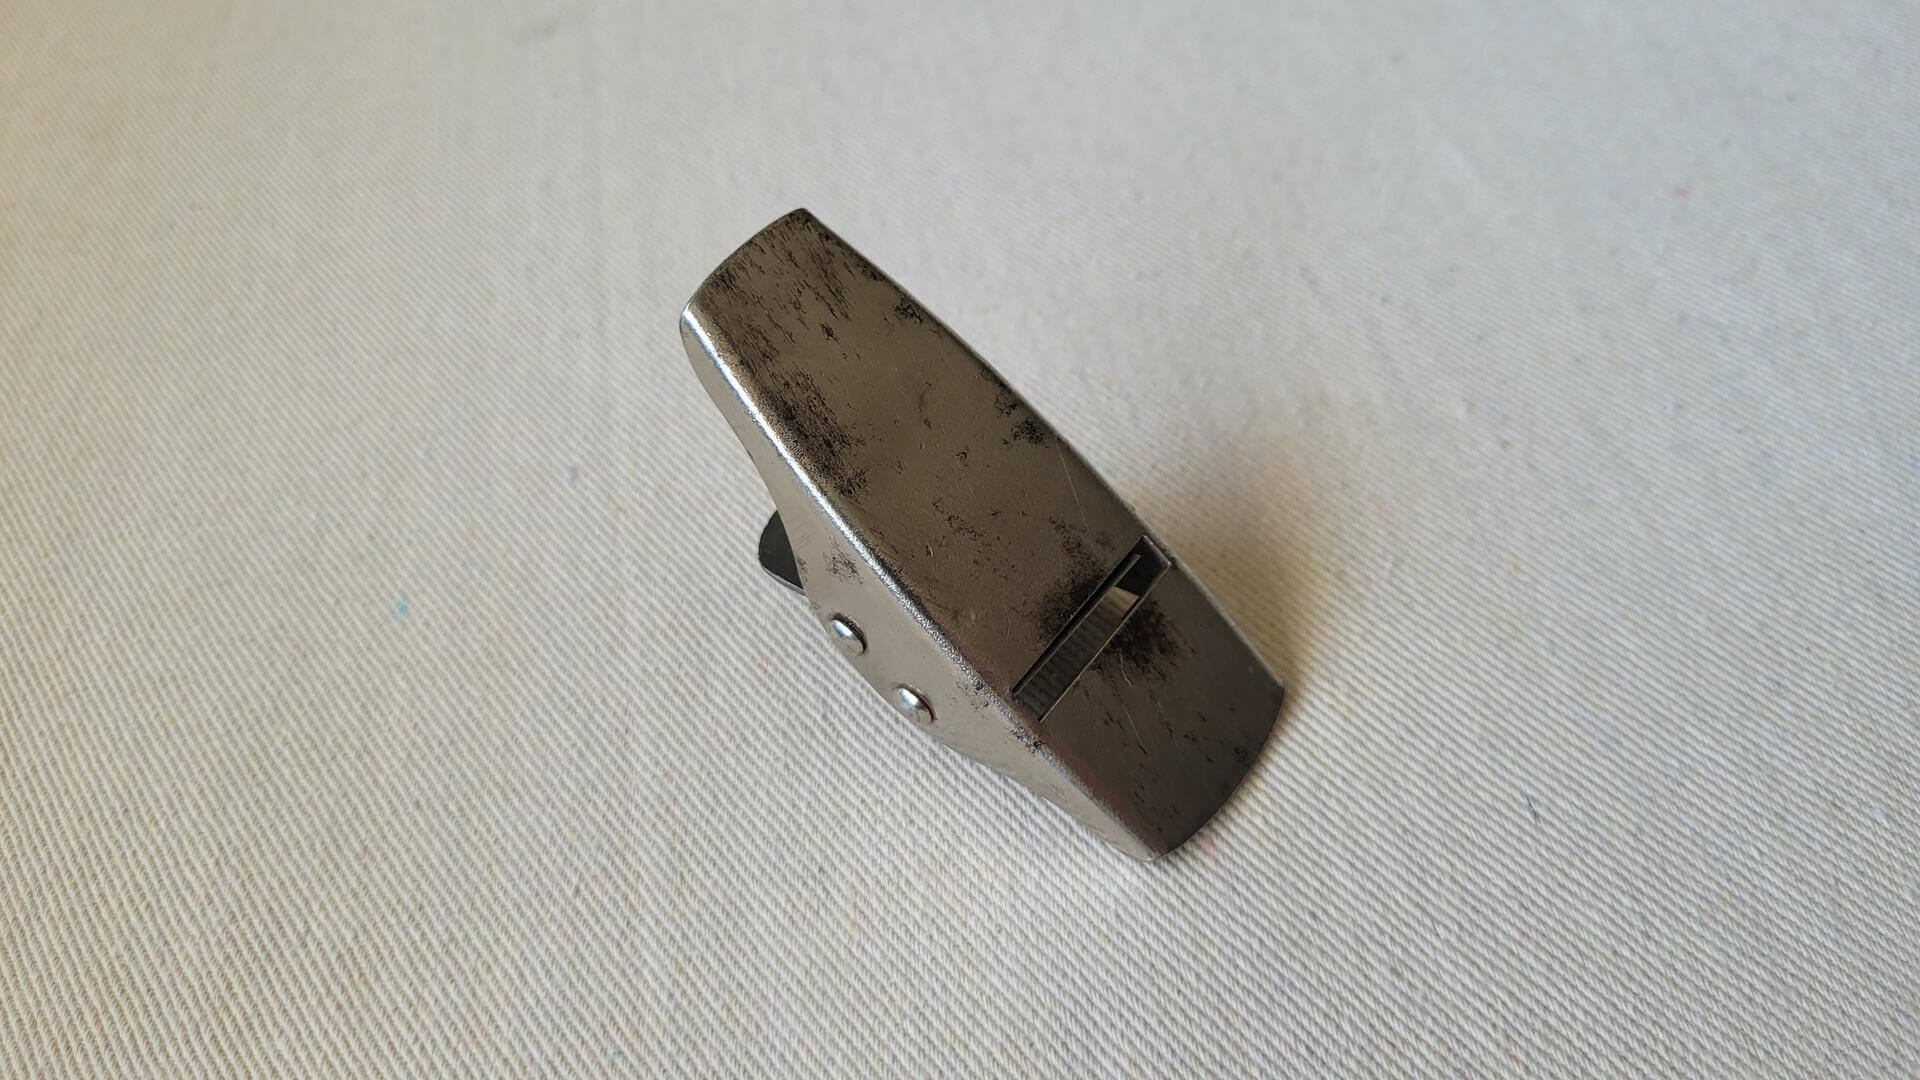 Vintage thumb block miniature plane by G.M. Co. Mfg. Inc. Long Island City NY. Antique mid century made in USA collectible carpentry & woodworking edge tool